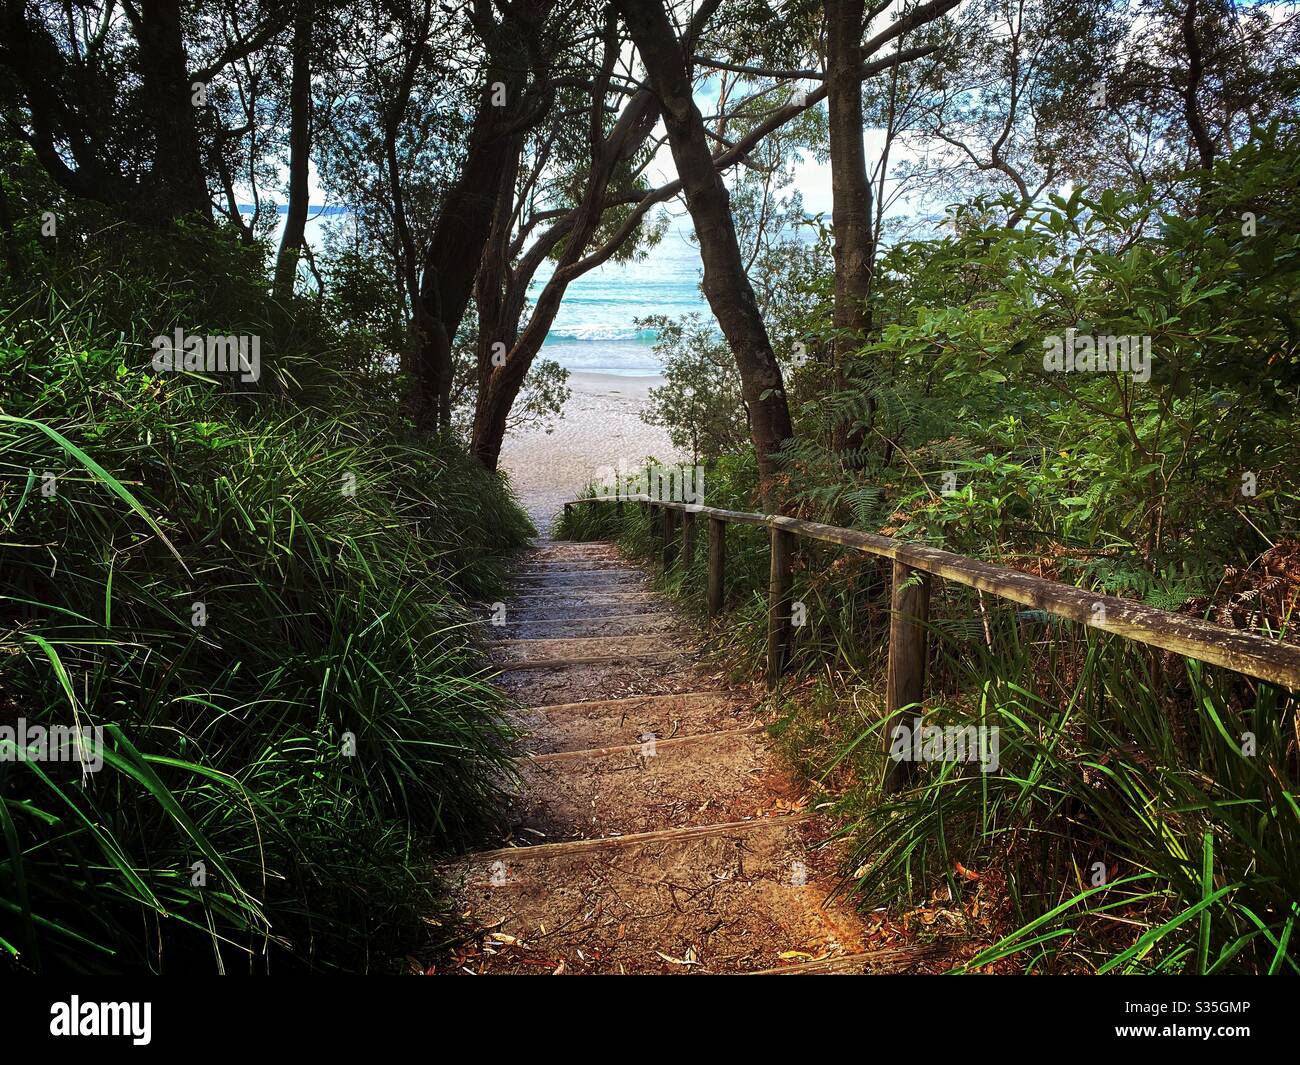 Track leading down to beautiful white sandy beach and crystal clear blue water. Concept of pathway to new beginning, a better place and exploring nature Stock Photo